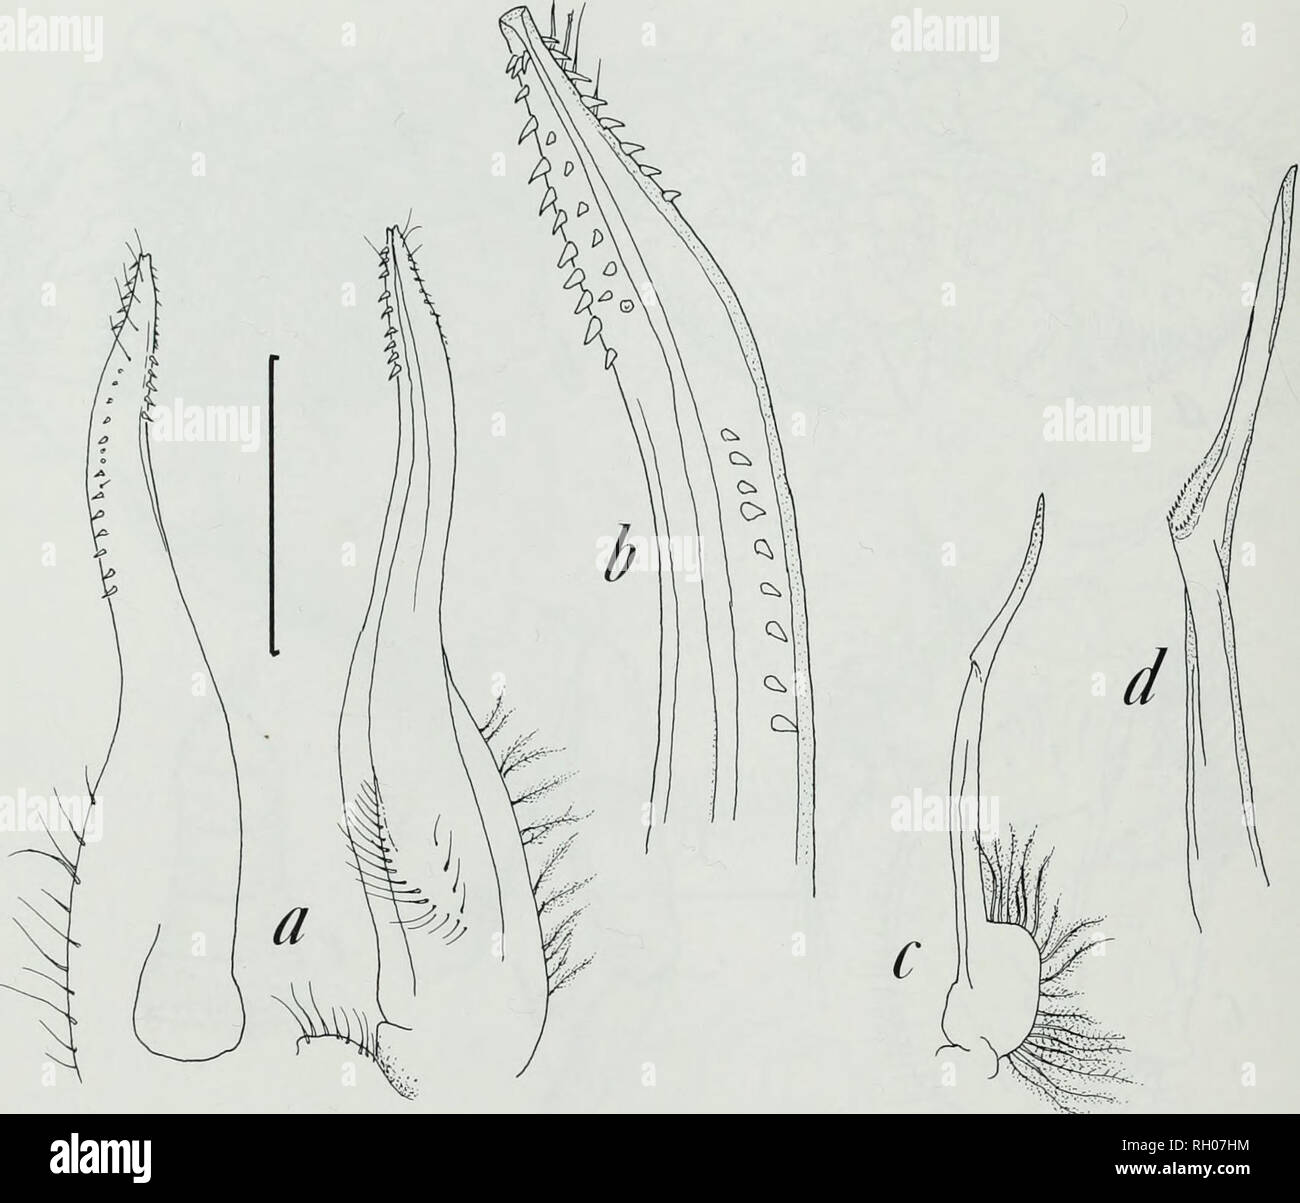 . Bulletin. Science. 108 SOUTHERN CALIFORNIA ACADEMY OF SCIENCES. Fig. 3. Pilumnoides rotundus Garth, male collected off San Diego, California, a, first pleopod, inner (left) and outer or posterior (right) views, b, higher magnification of tip of first pleopod. c, second pleopod, outer (posterior) view, d, higher magnification of tip of second pleopod. Scale bar = 1.0 mm for Figs, a, c. Carapace: Garth's figure of the female holotype (Garth 1940: pi. 23, fig. 1), carapace length 7.4 mm, carapace width 8.8 mm (LACM 37-132.1; former AHF 374), has larger anterolateral teeth, and the overall impre Stock Photo